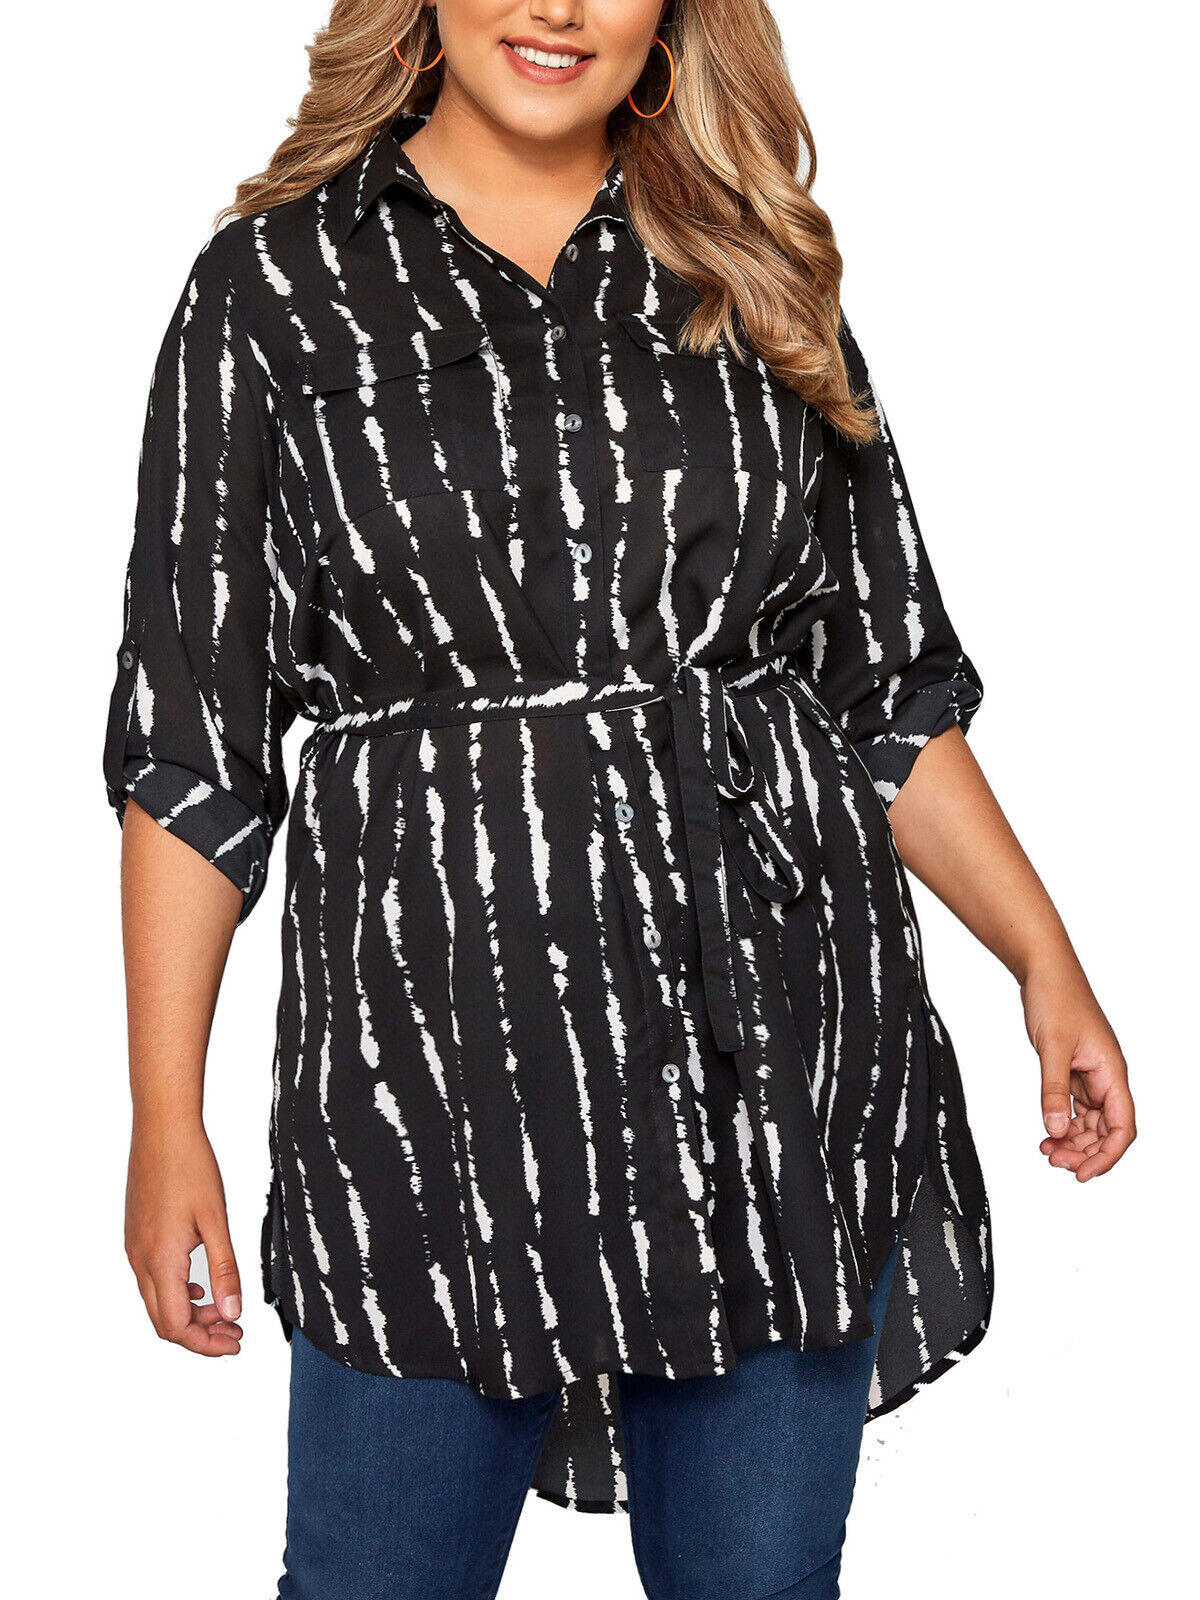 EX YOURS Curve Black Abstract Stripe Longline Shirt Sizes 16 20 22 26/28 NO BELT